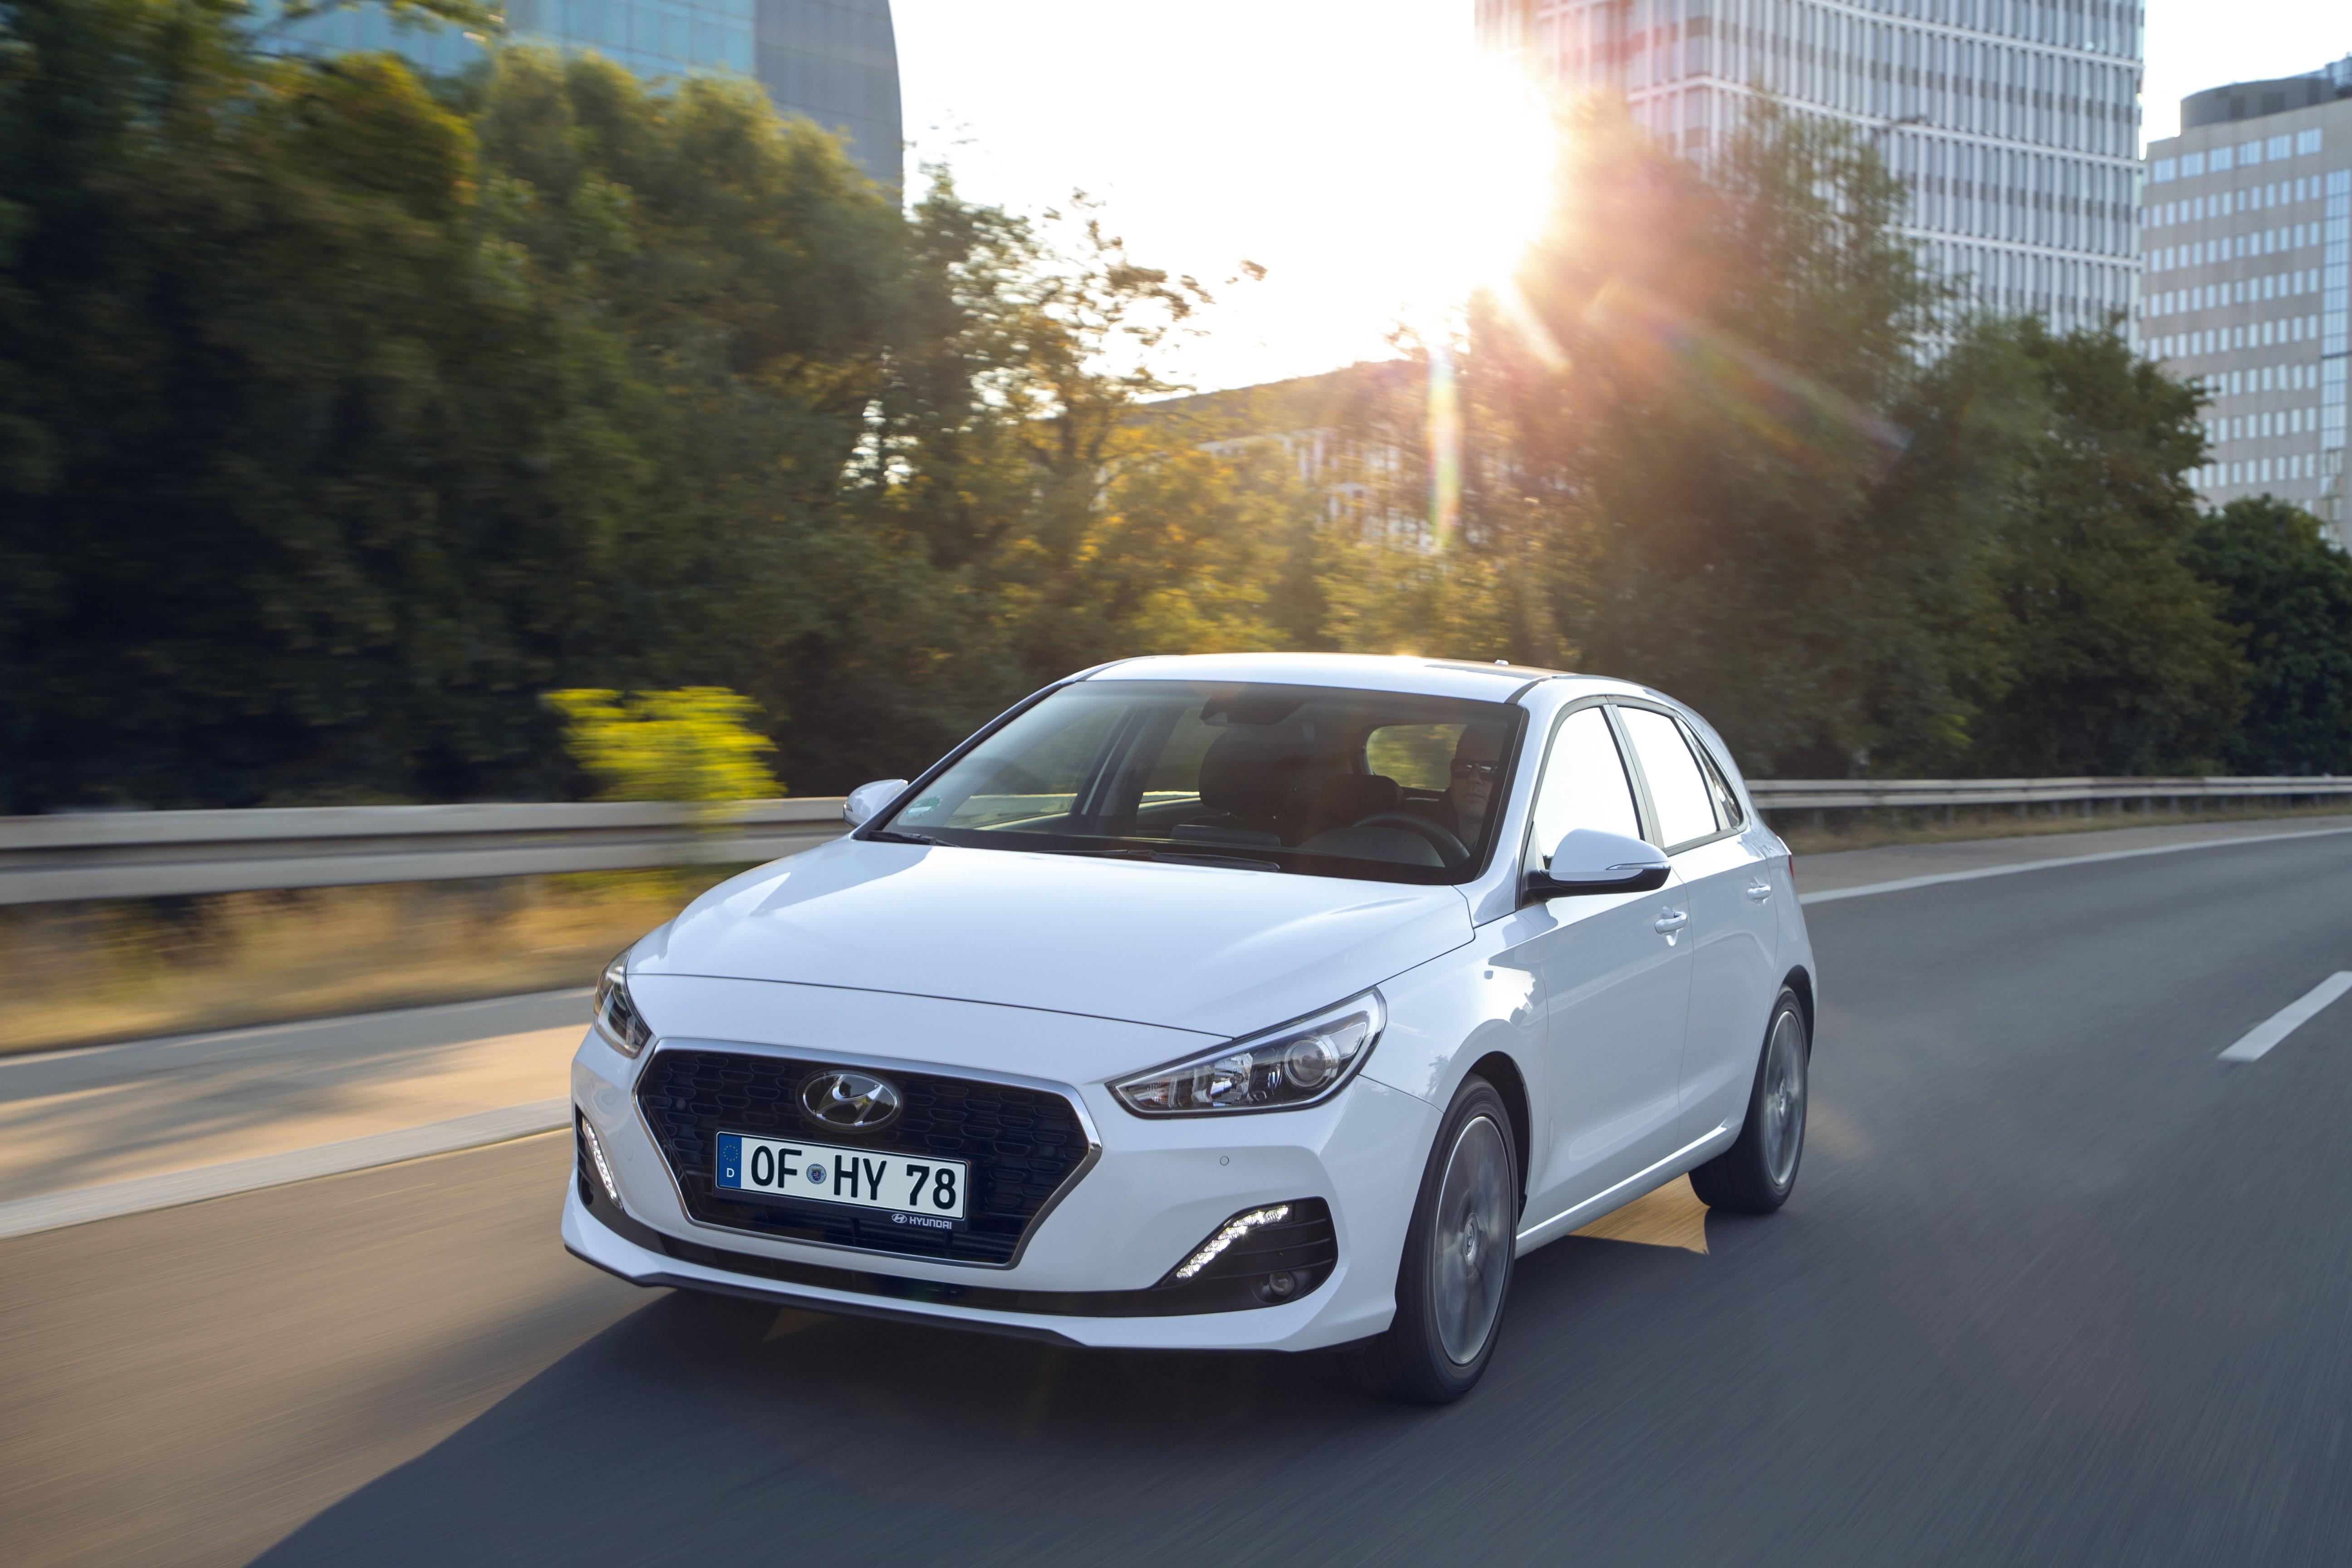 2019 Hyundai i30 landed in Europe with improvements